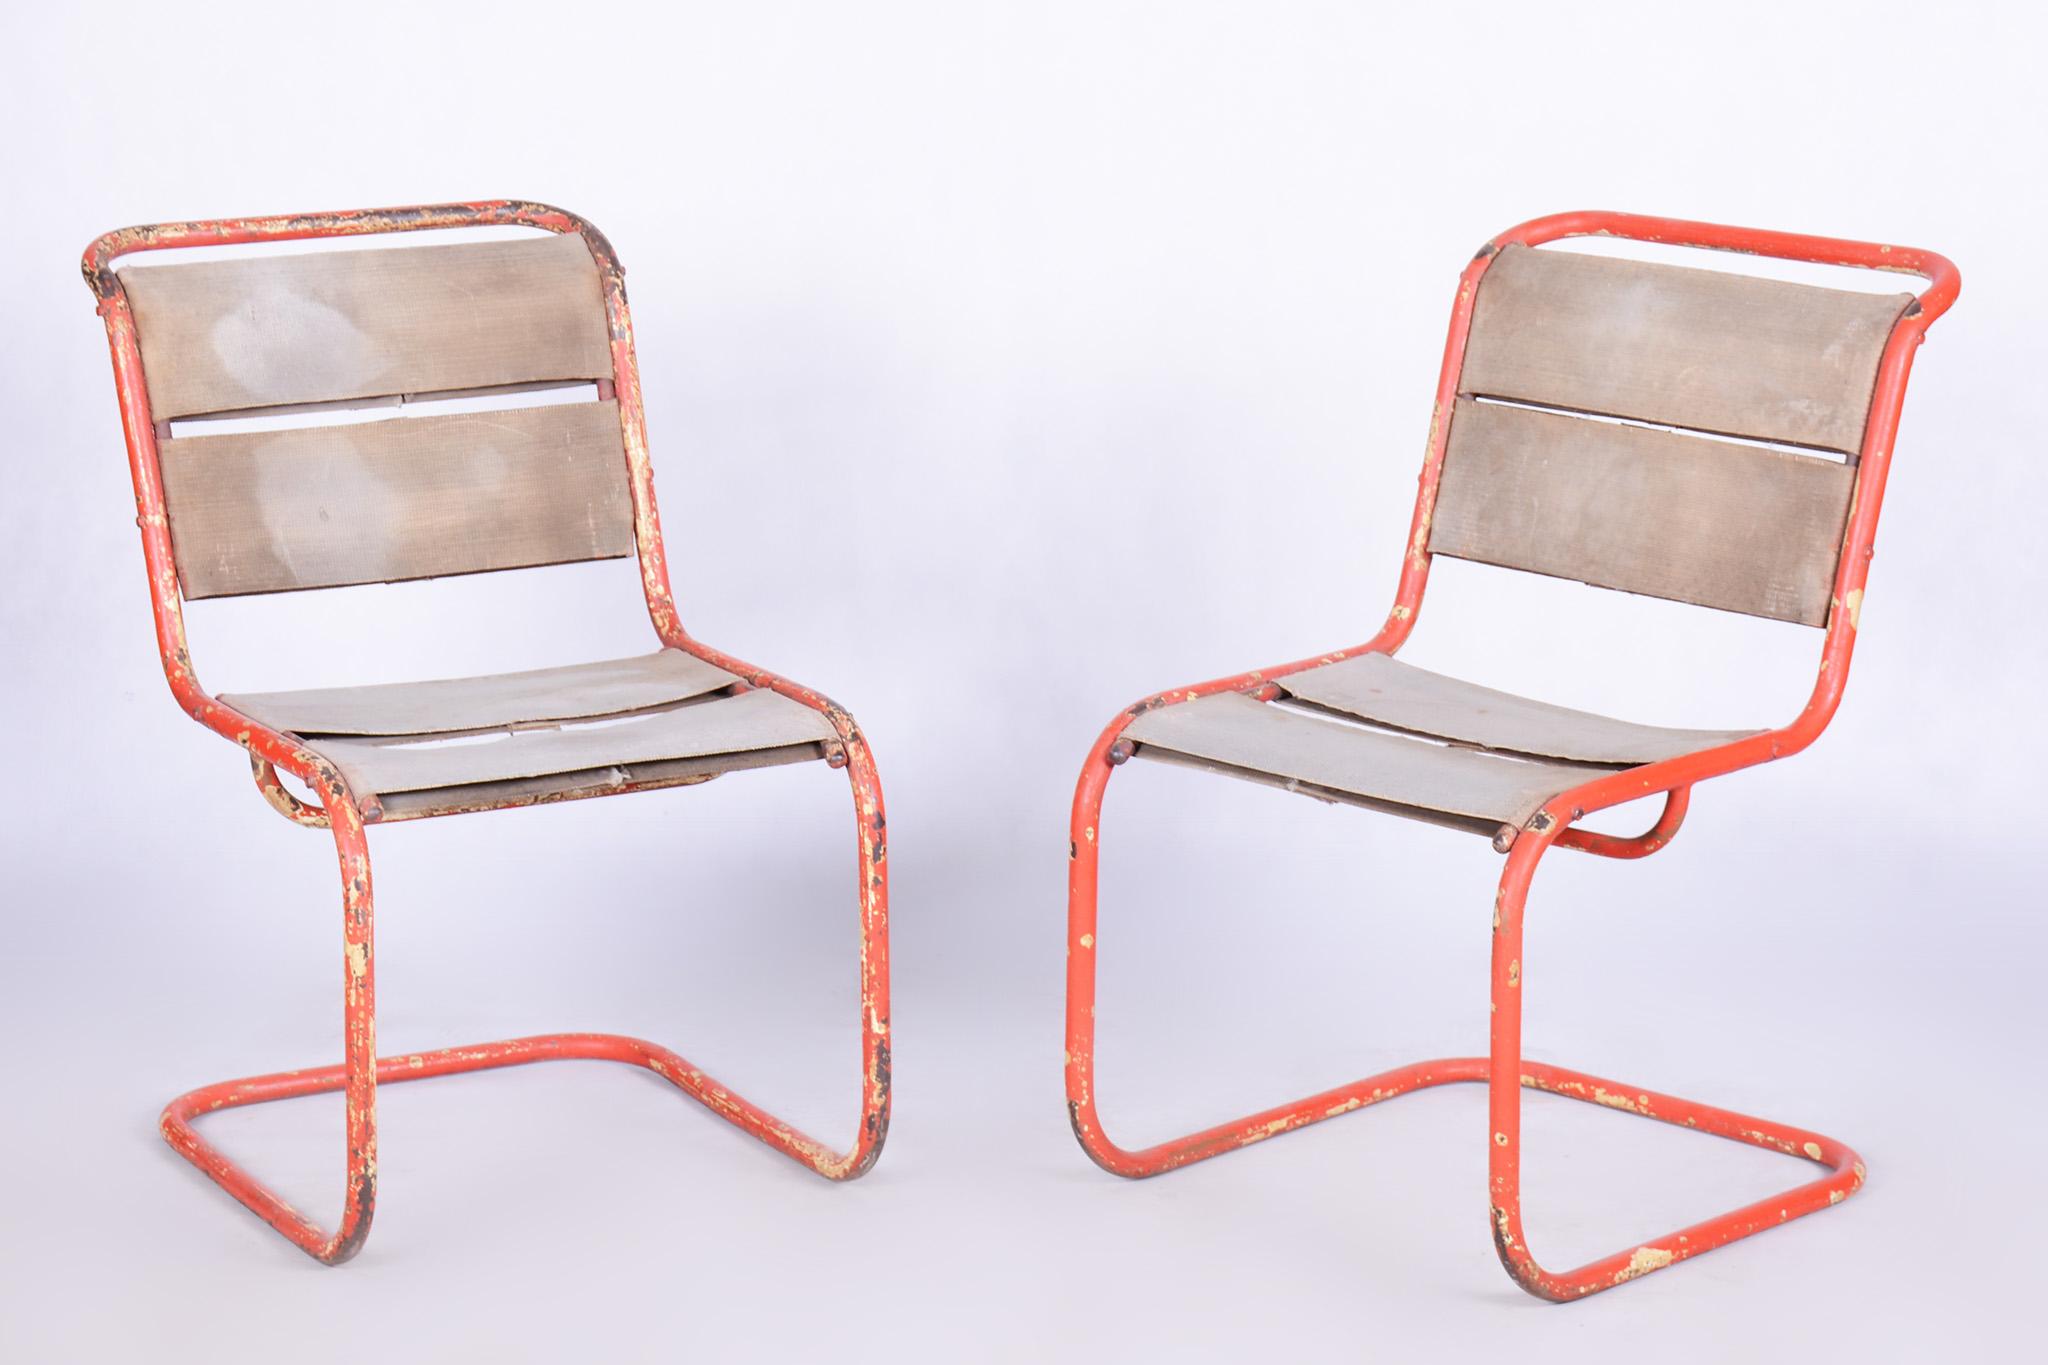 Original Pair of Chairs by Josef Gocar, Lacquered Steel, Czechia, 1930s For Sale 4